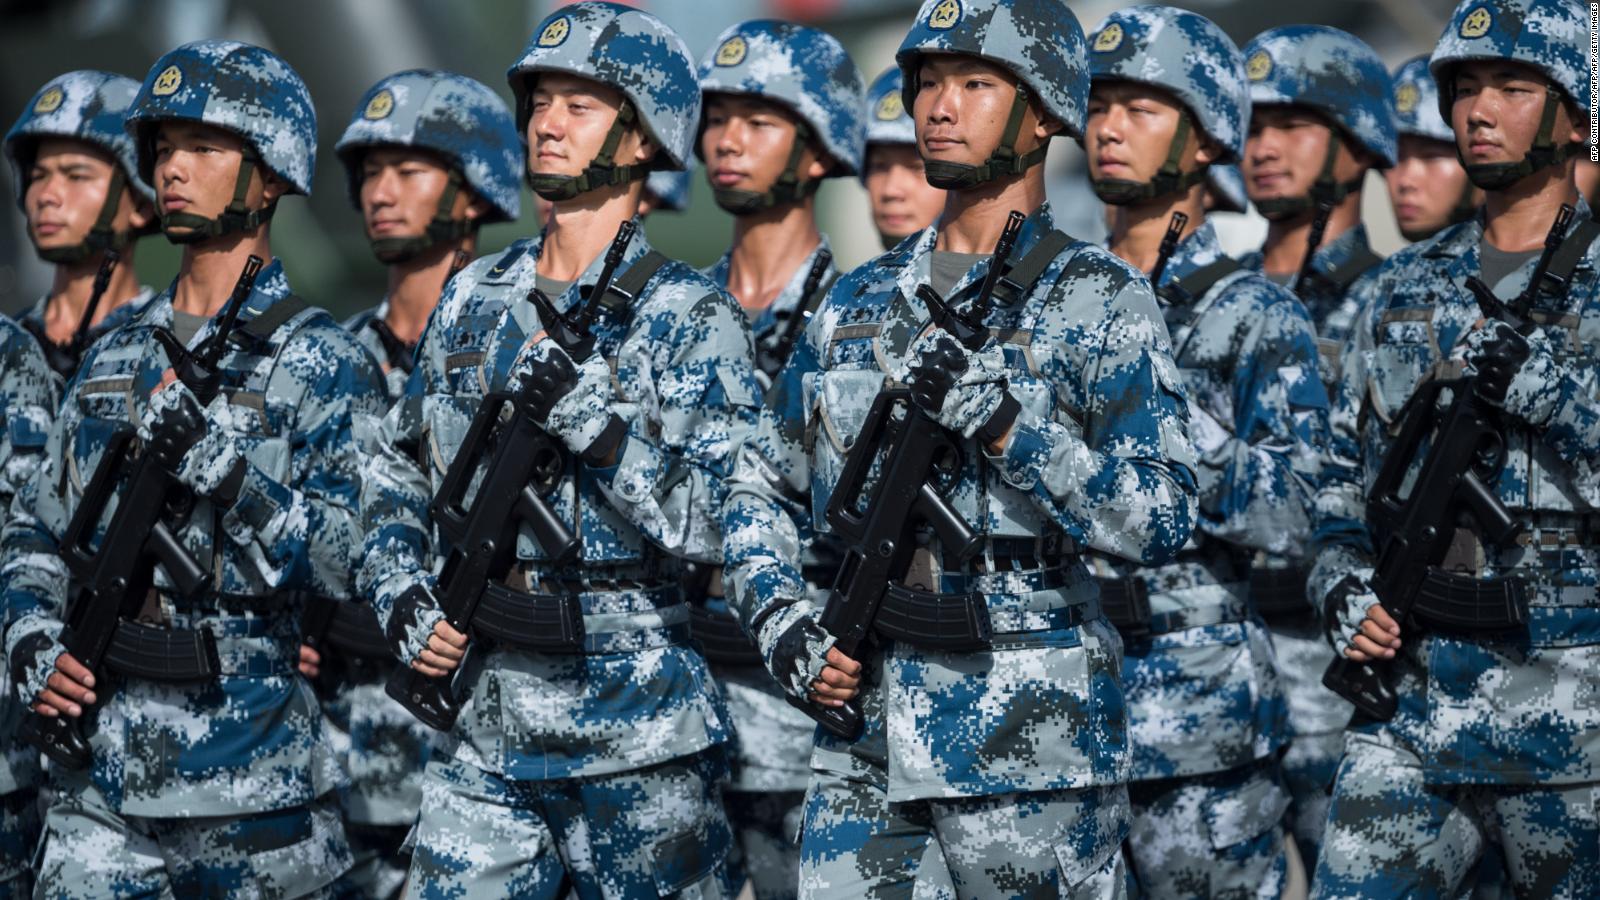 Army image, Picture of Soldiers, Military Wallpaper: View China Army Uniform 2020 Image